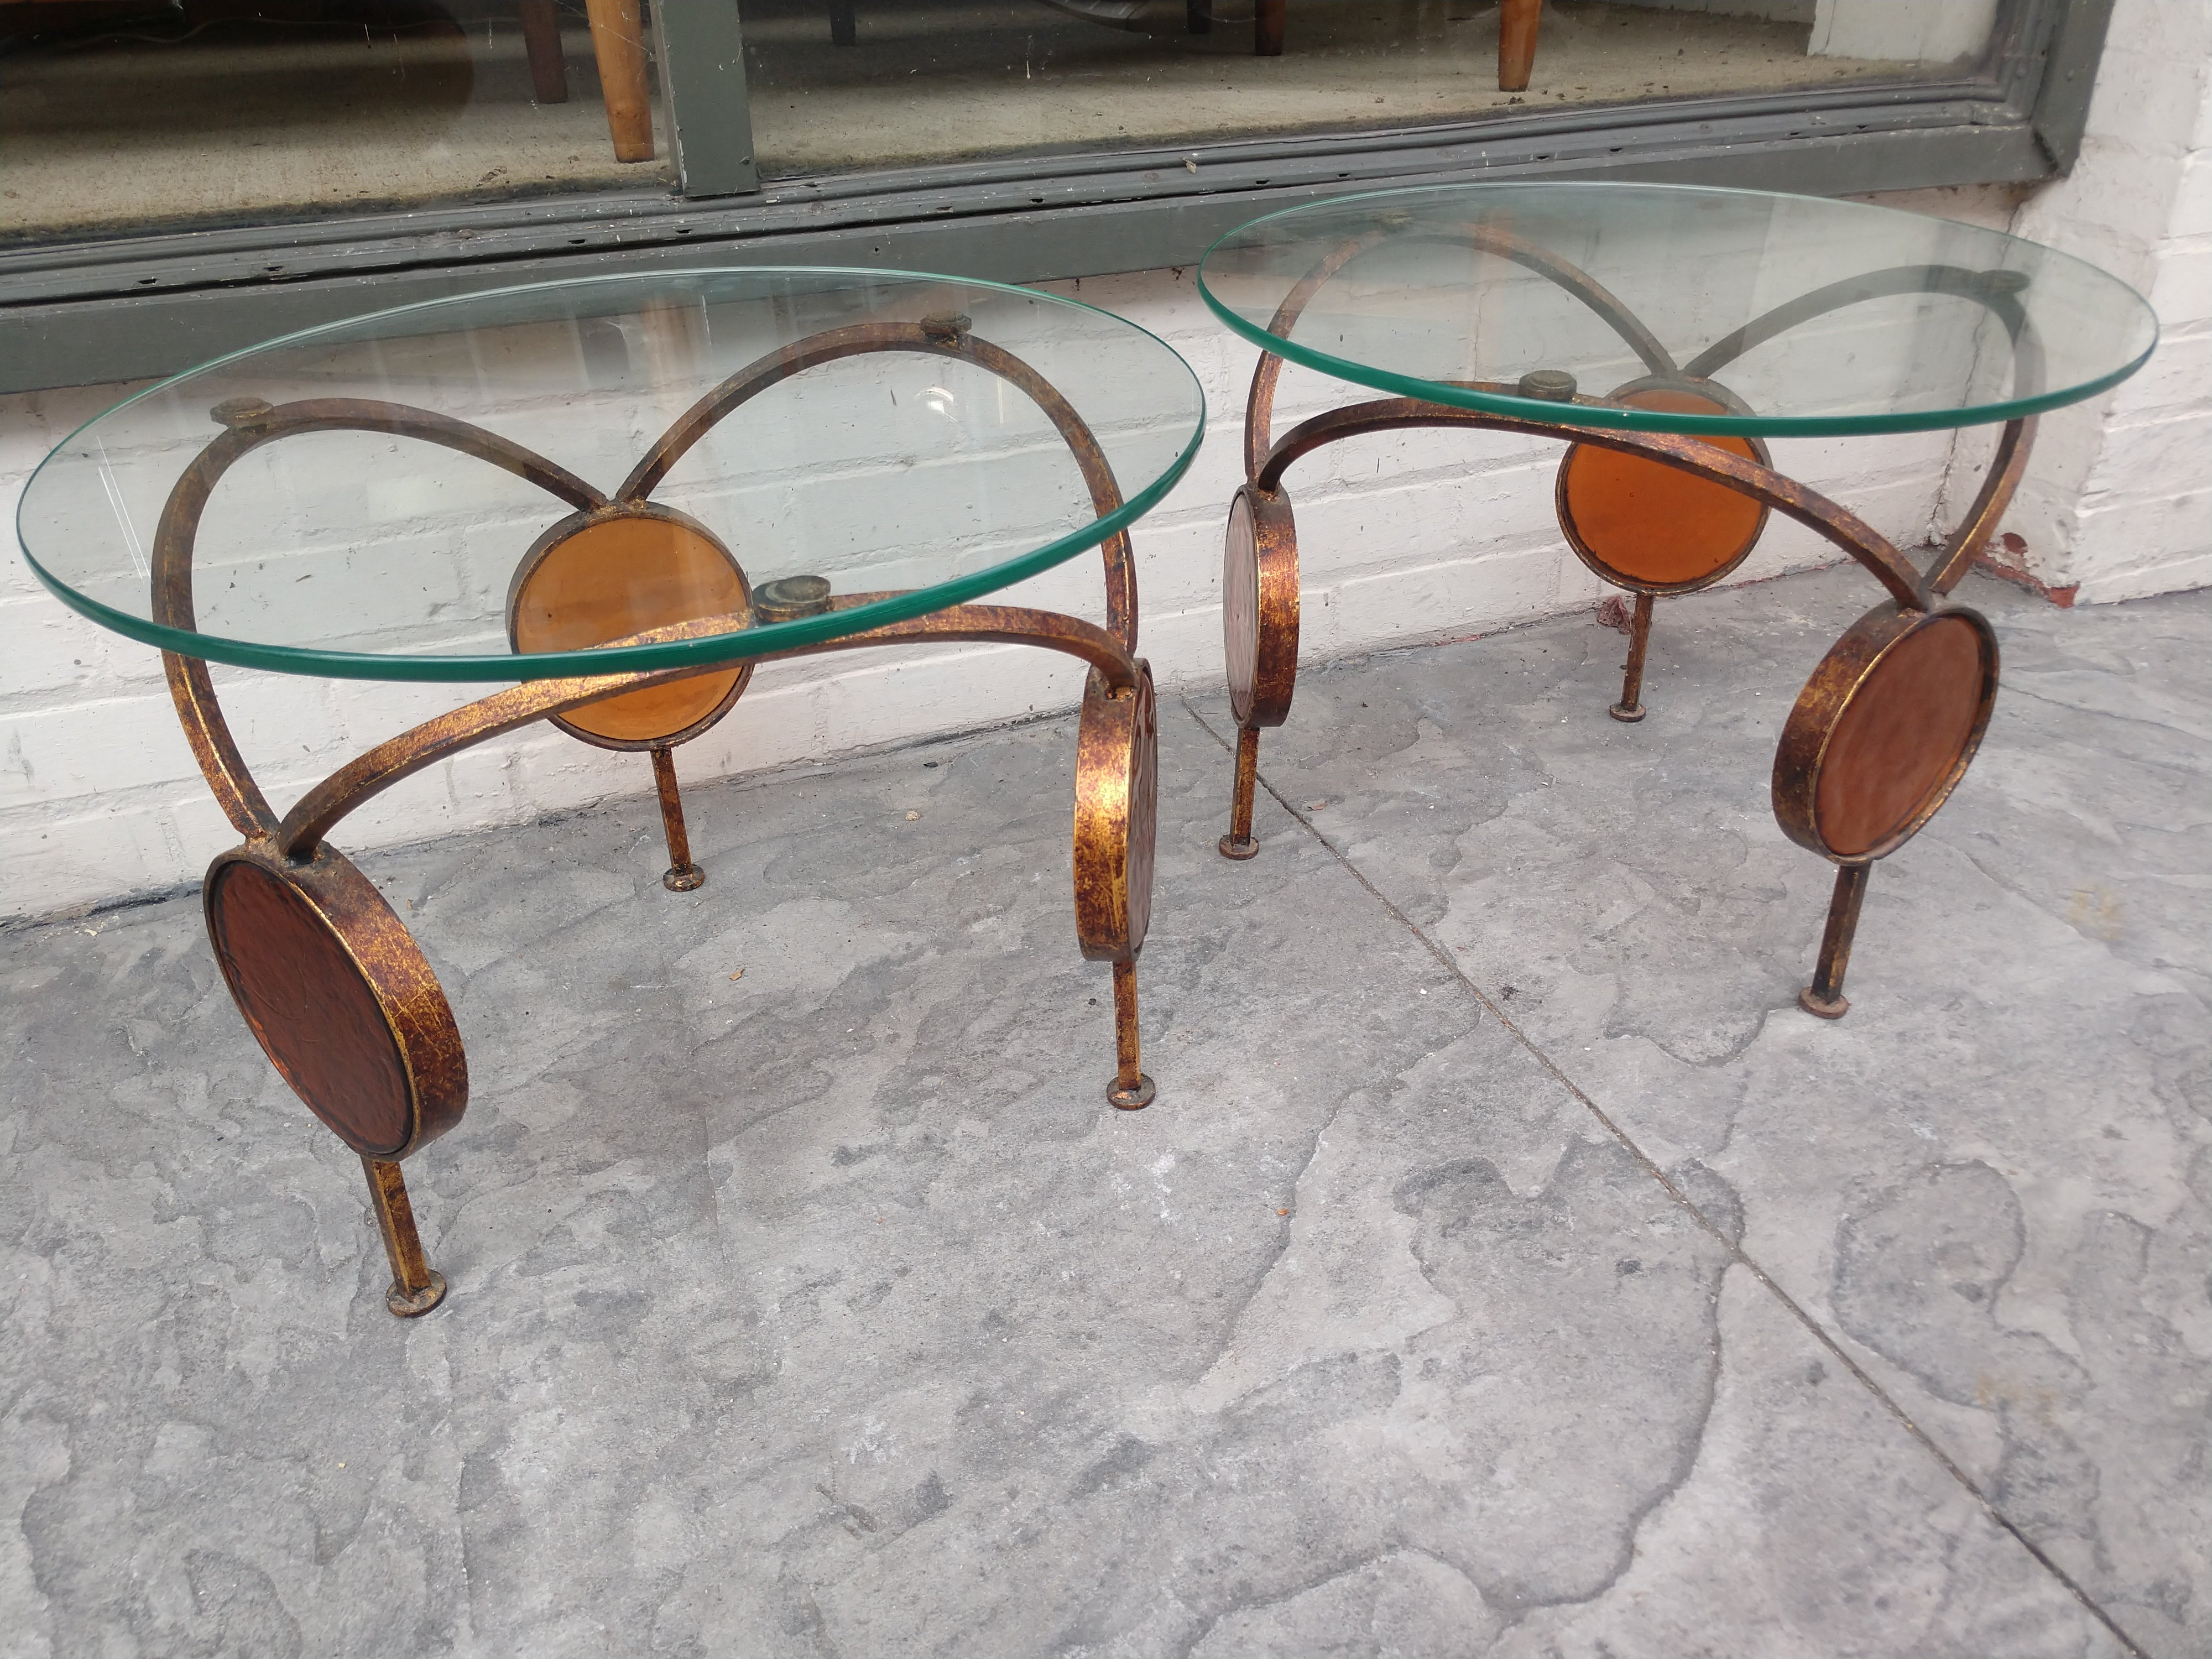 Pair of round Gilt iron with Amber Glass Discs in a hoop form. Rare distinct tables in excellent vintage condition with minimal wear. Glass is perfect. These can be parcel posted.